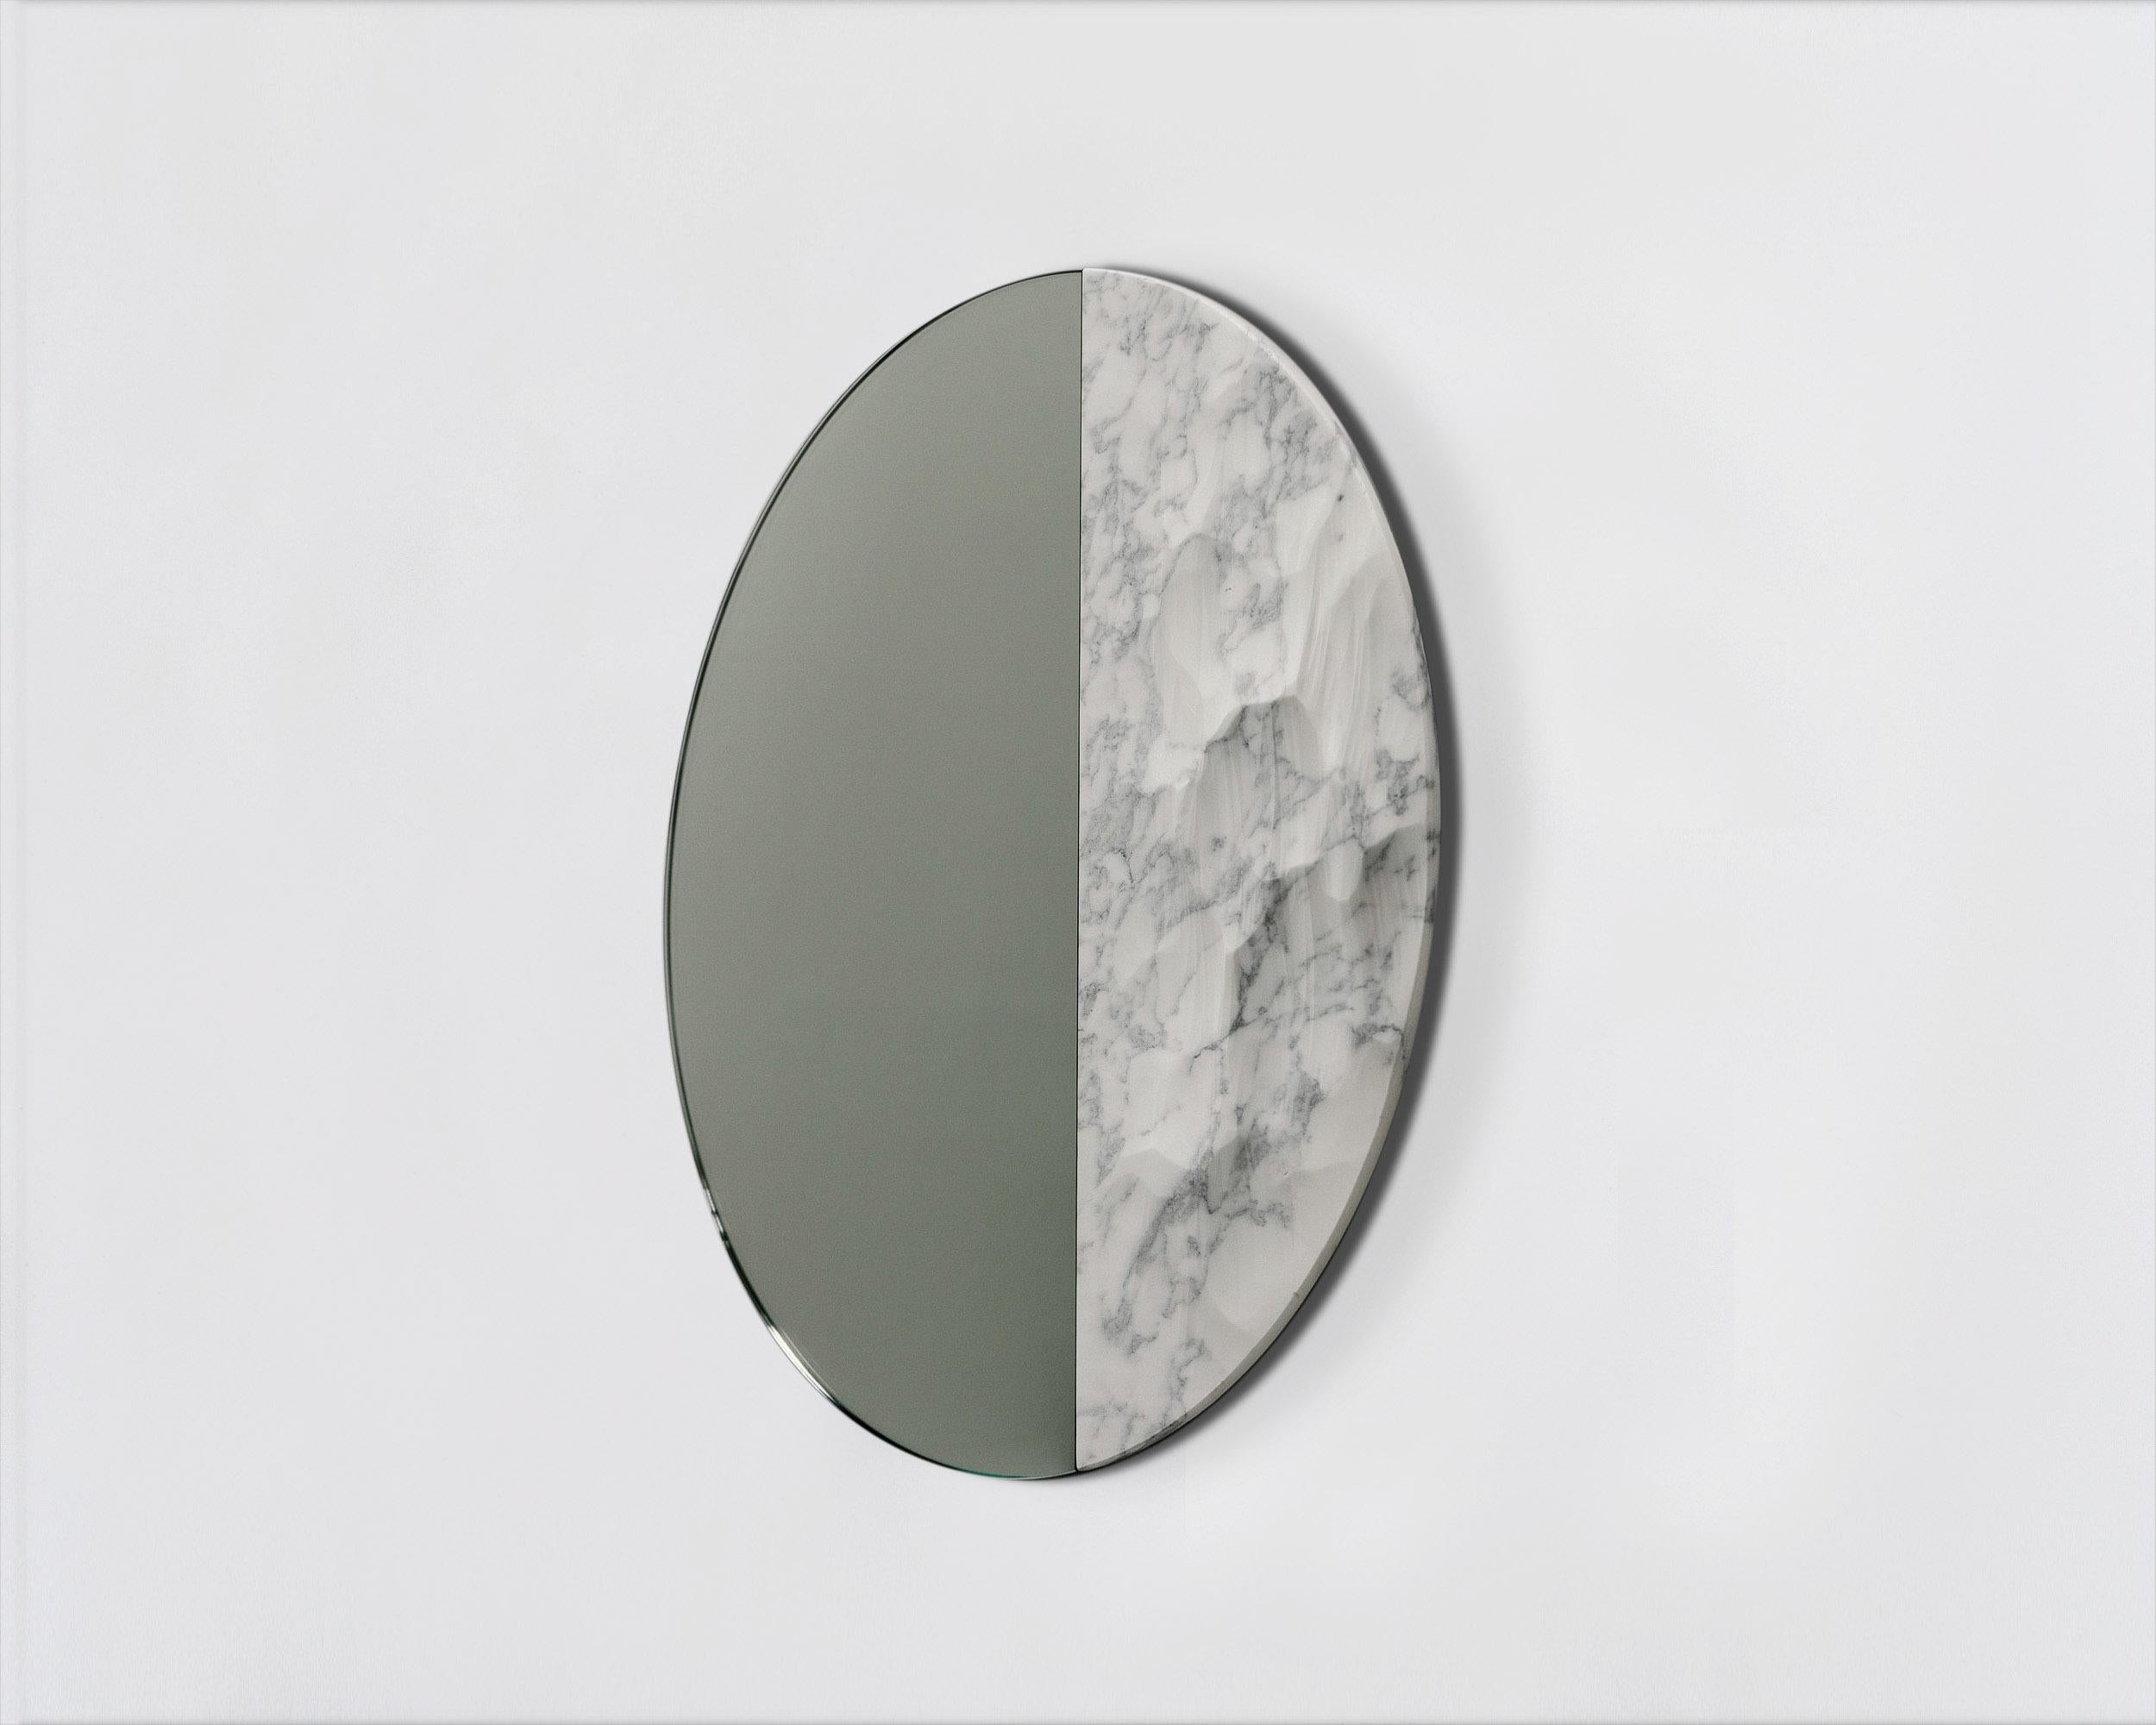 Snowmotion
Round mirror signed by Ocrùm 

Dimensions: 31.5 x 1.75 in
Materials: Carved marble and glass mirror
Colors: Liberty white and clear mirror
Customization: Glass tint, frame finish and size are customizable at an additional